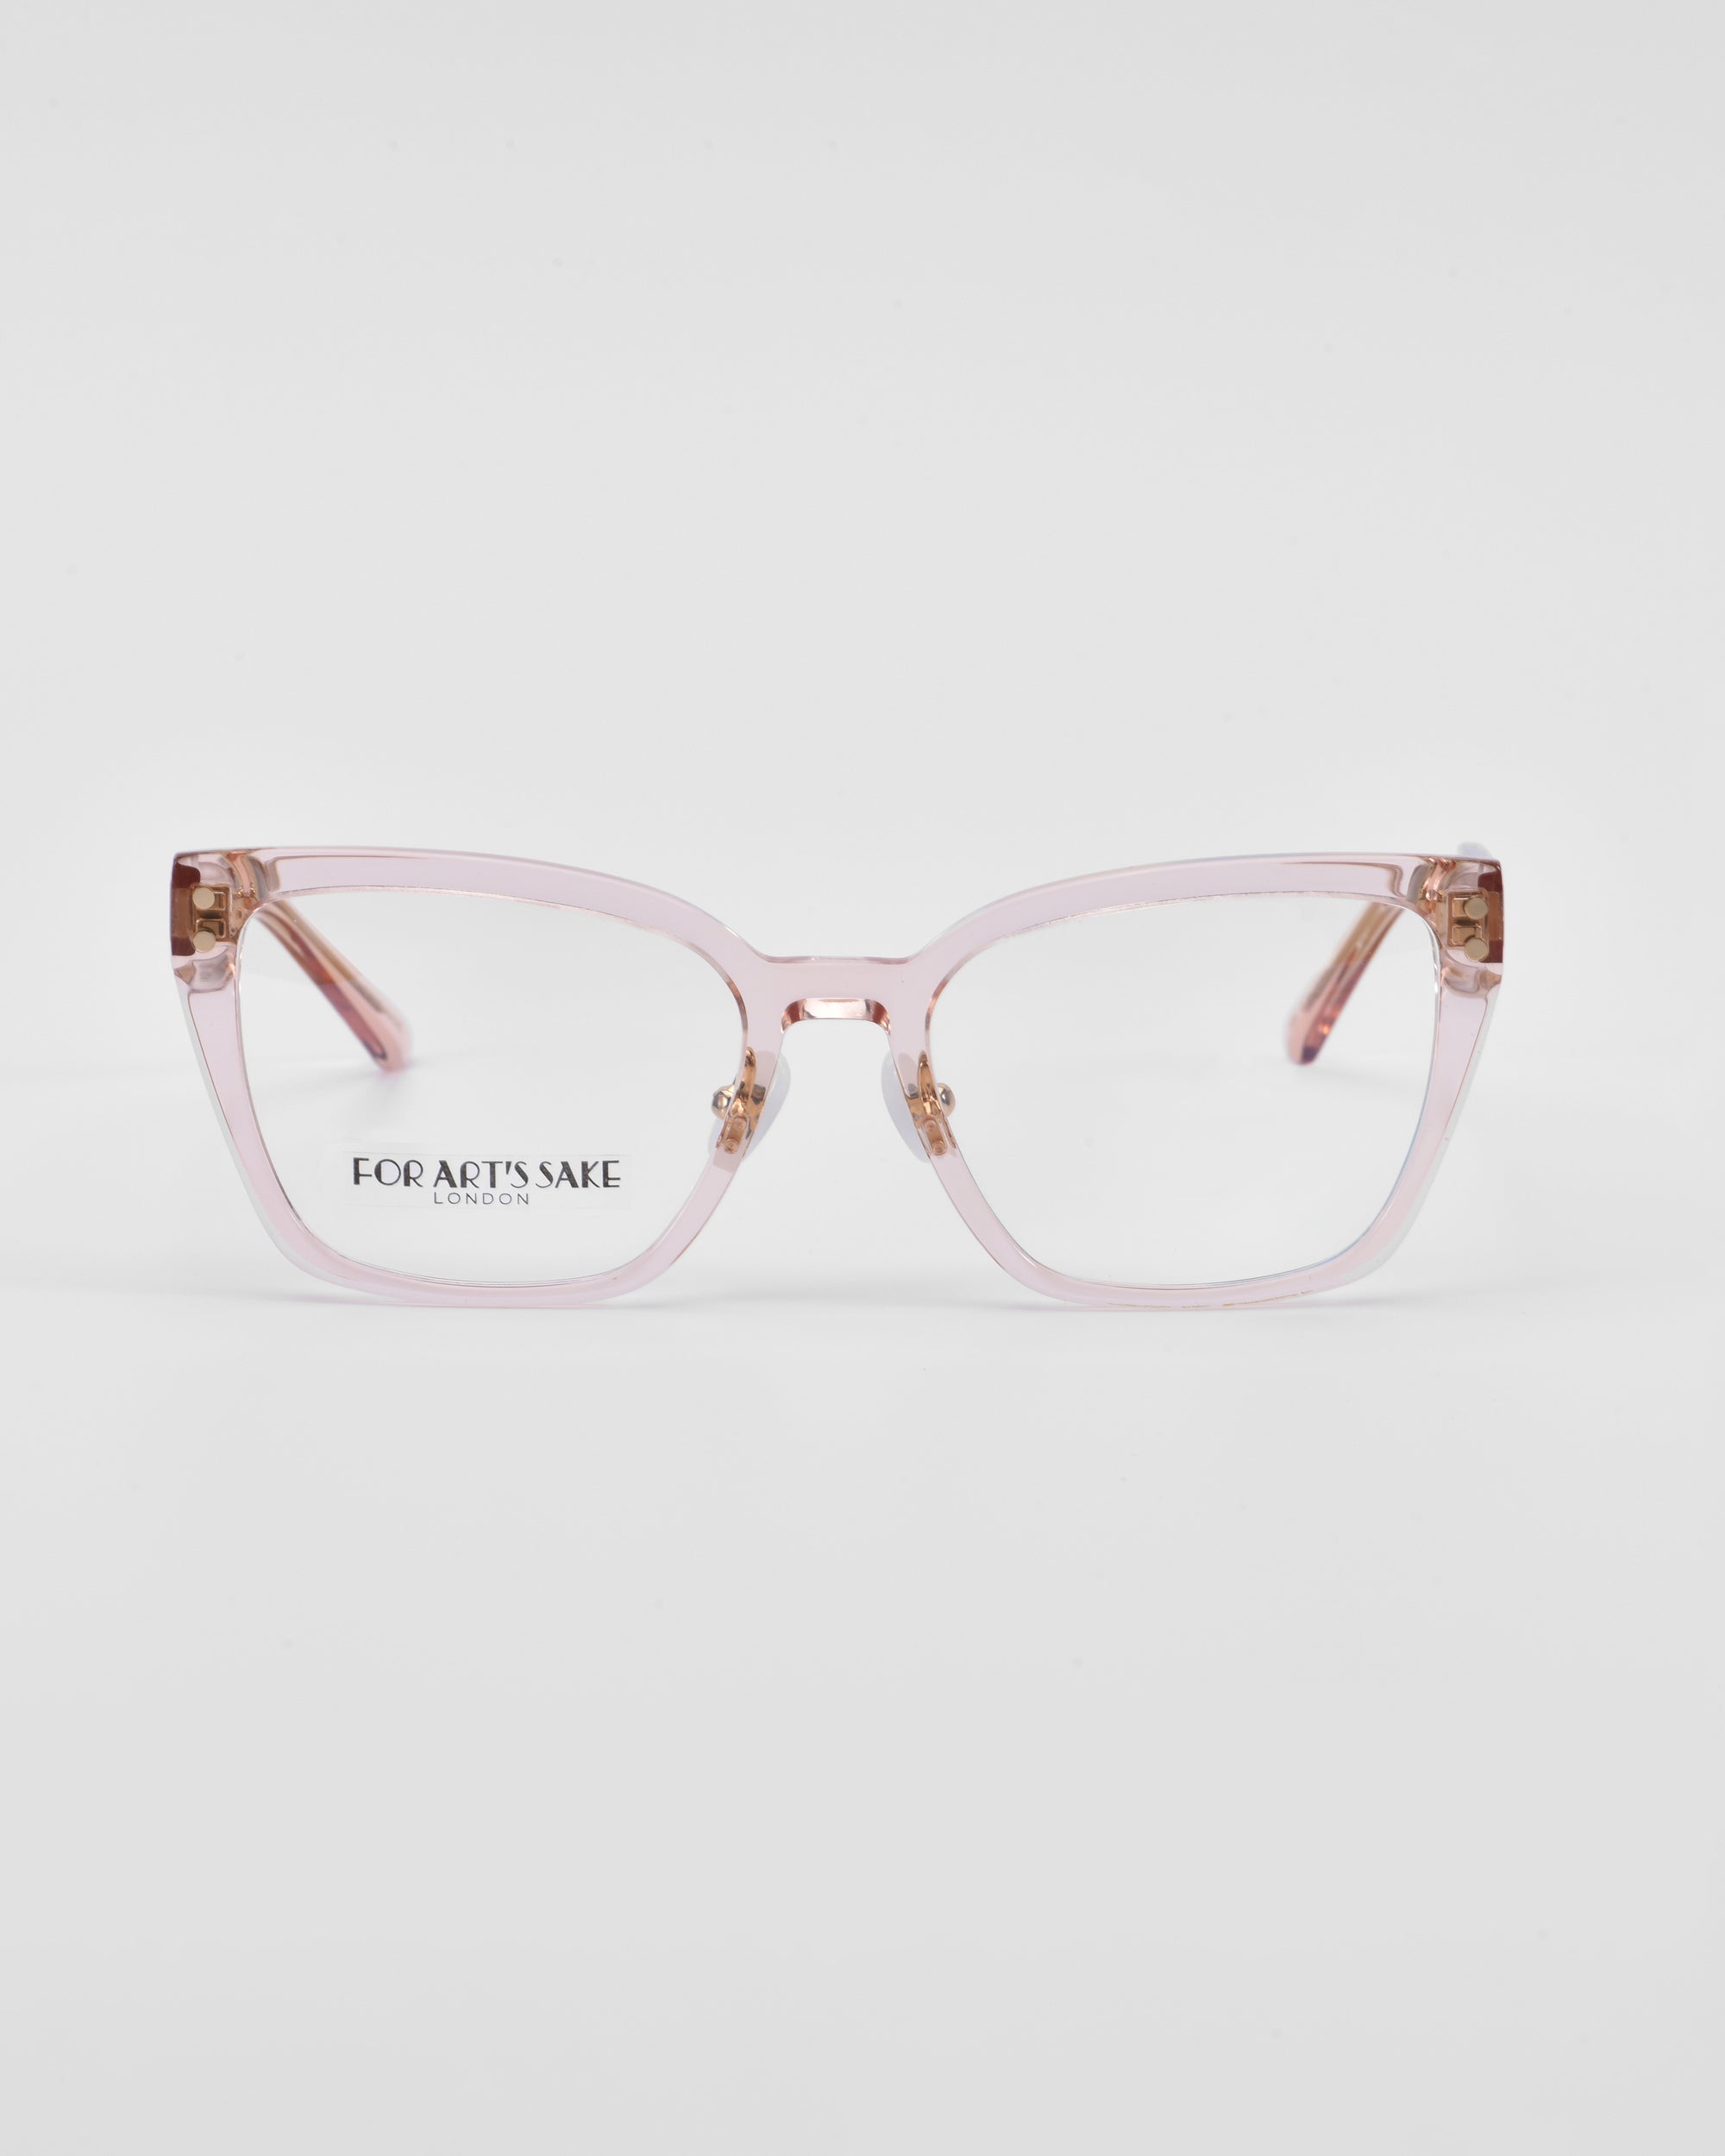 A pair of pink-colored Abbey cat-eye opticals with a transparent frame. The brand name "For Art's Sake®" is visible on the left lens. The background is plain white.